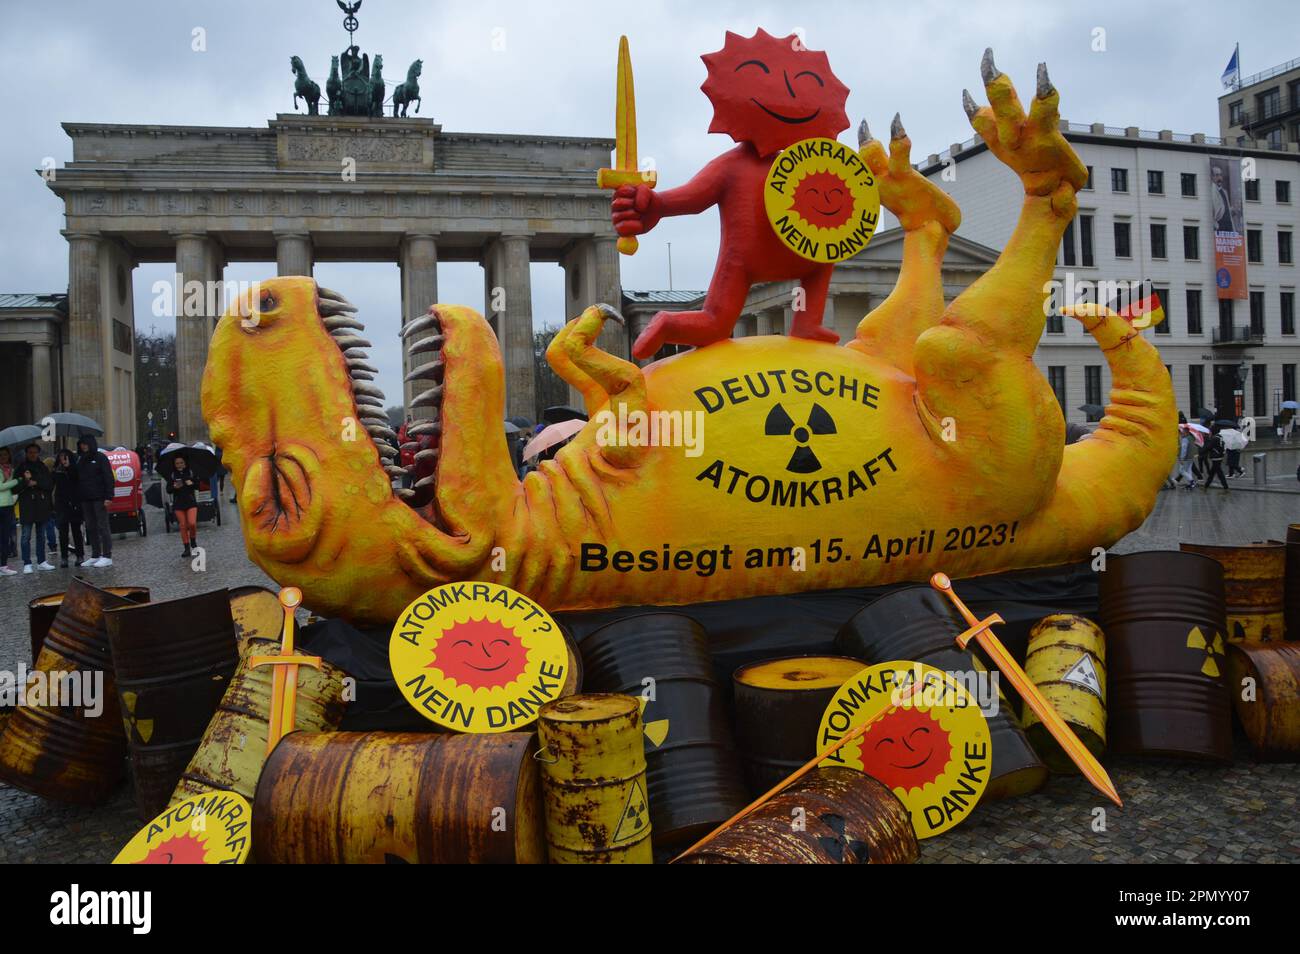 Berlin, Germany - April 15, 2023 - Germany switches off its last three remaining nuclear power plants - Anti-atomic activists celebrate at Pariser Platz in front of the Brandenburg Gate victory in a battle that has lasted 60 years. (Photo by Markku Rainer Peltonen) Stock Photo